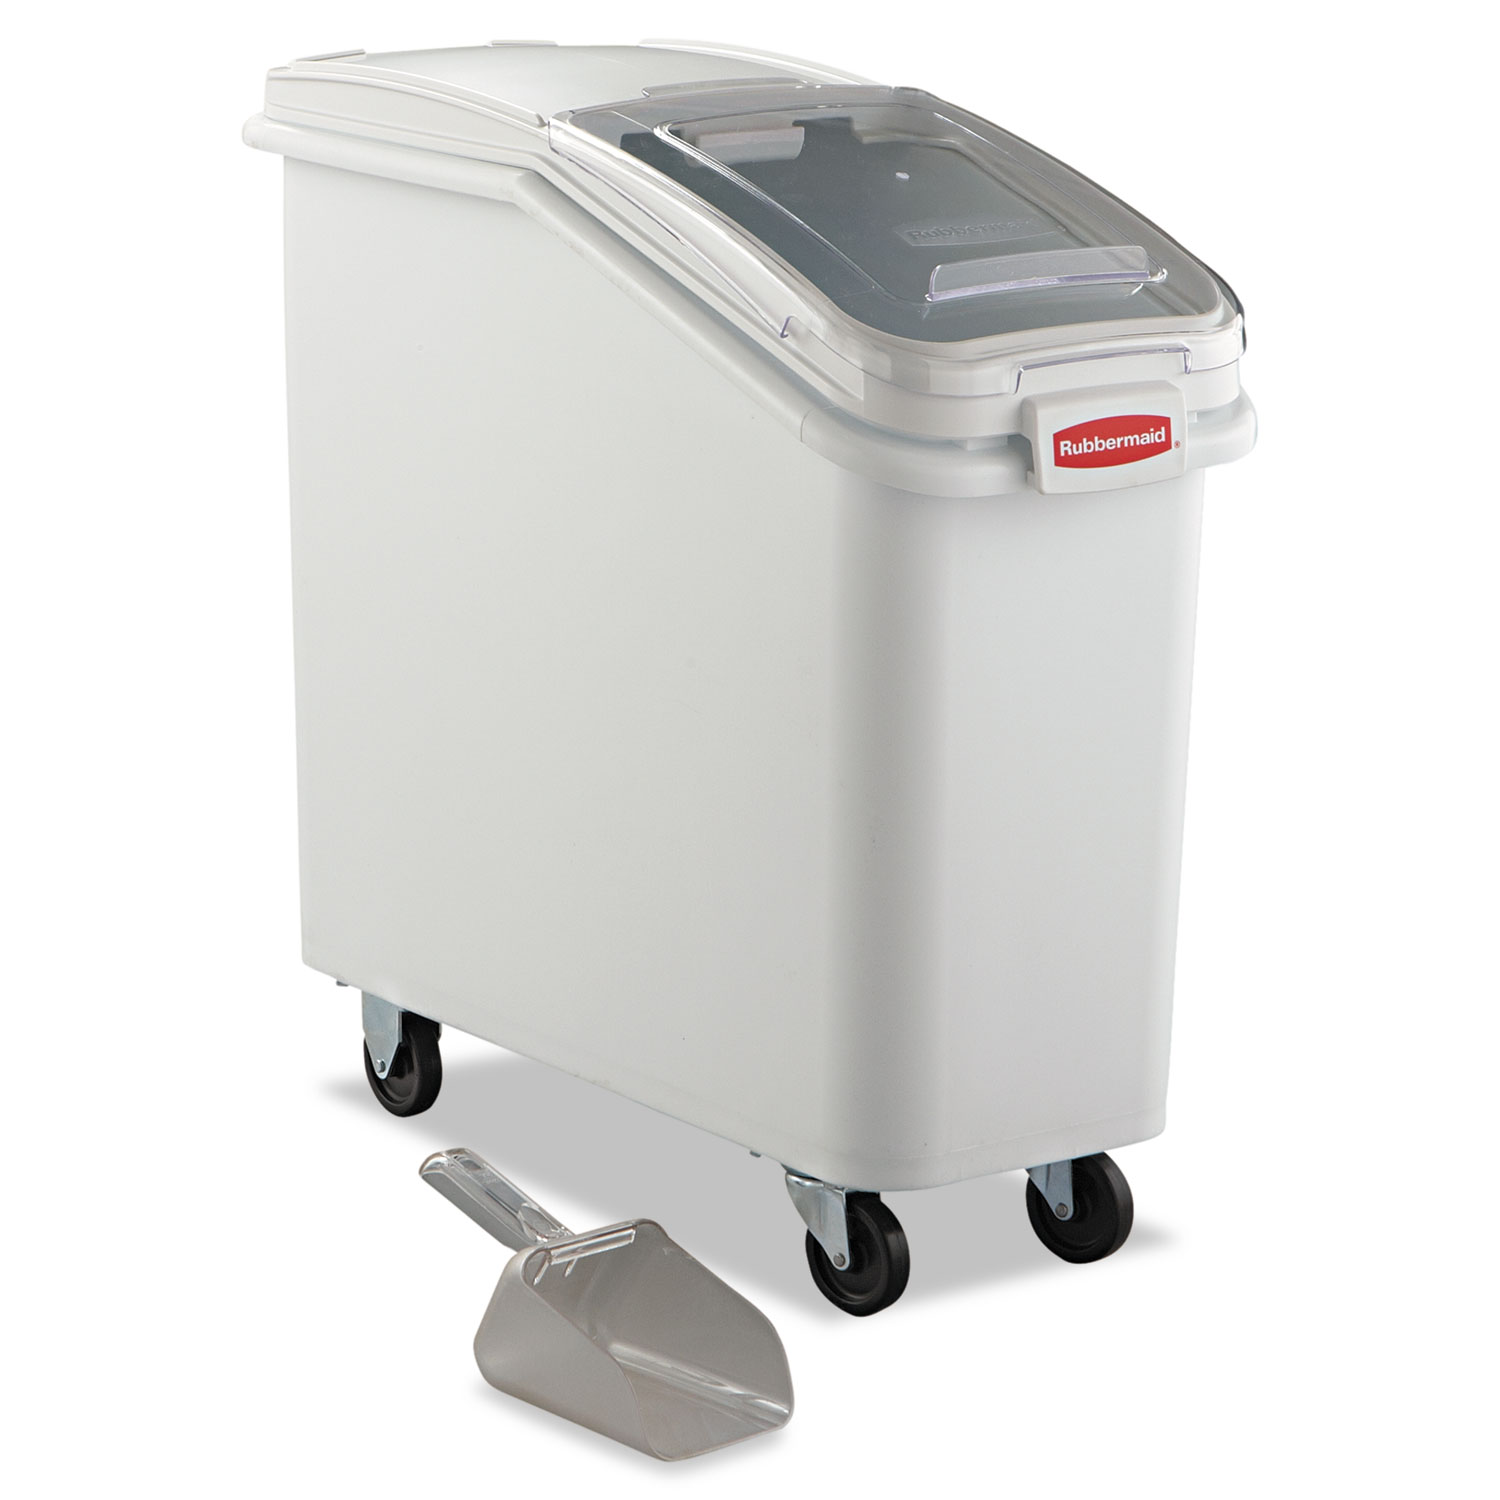 Rubbermaid Commercial Cutlery Bin 4 Compartments Plastic Gray